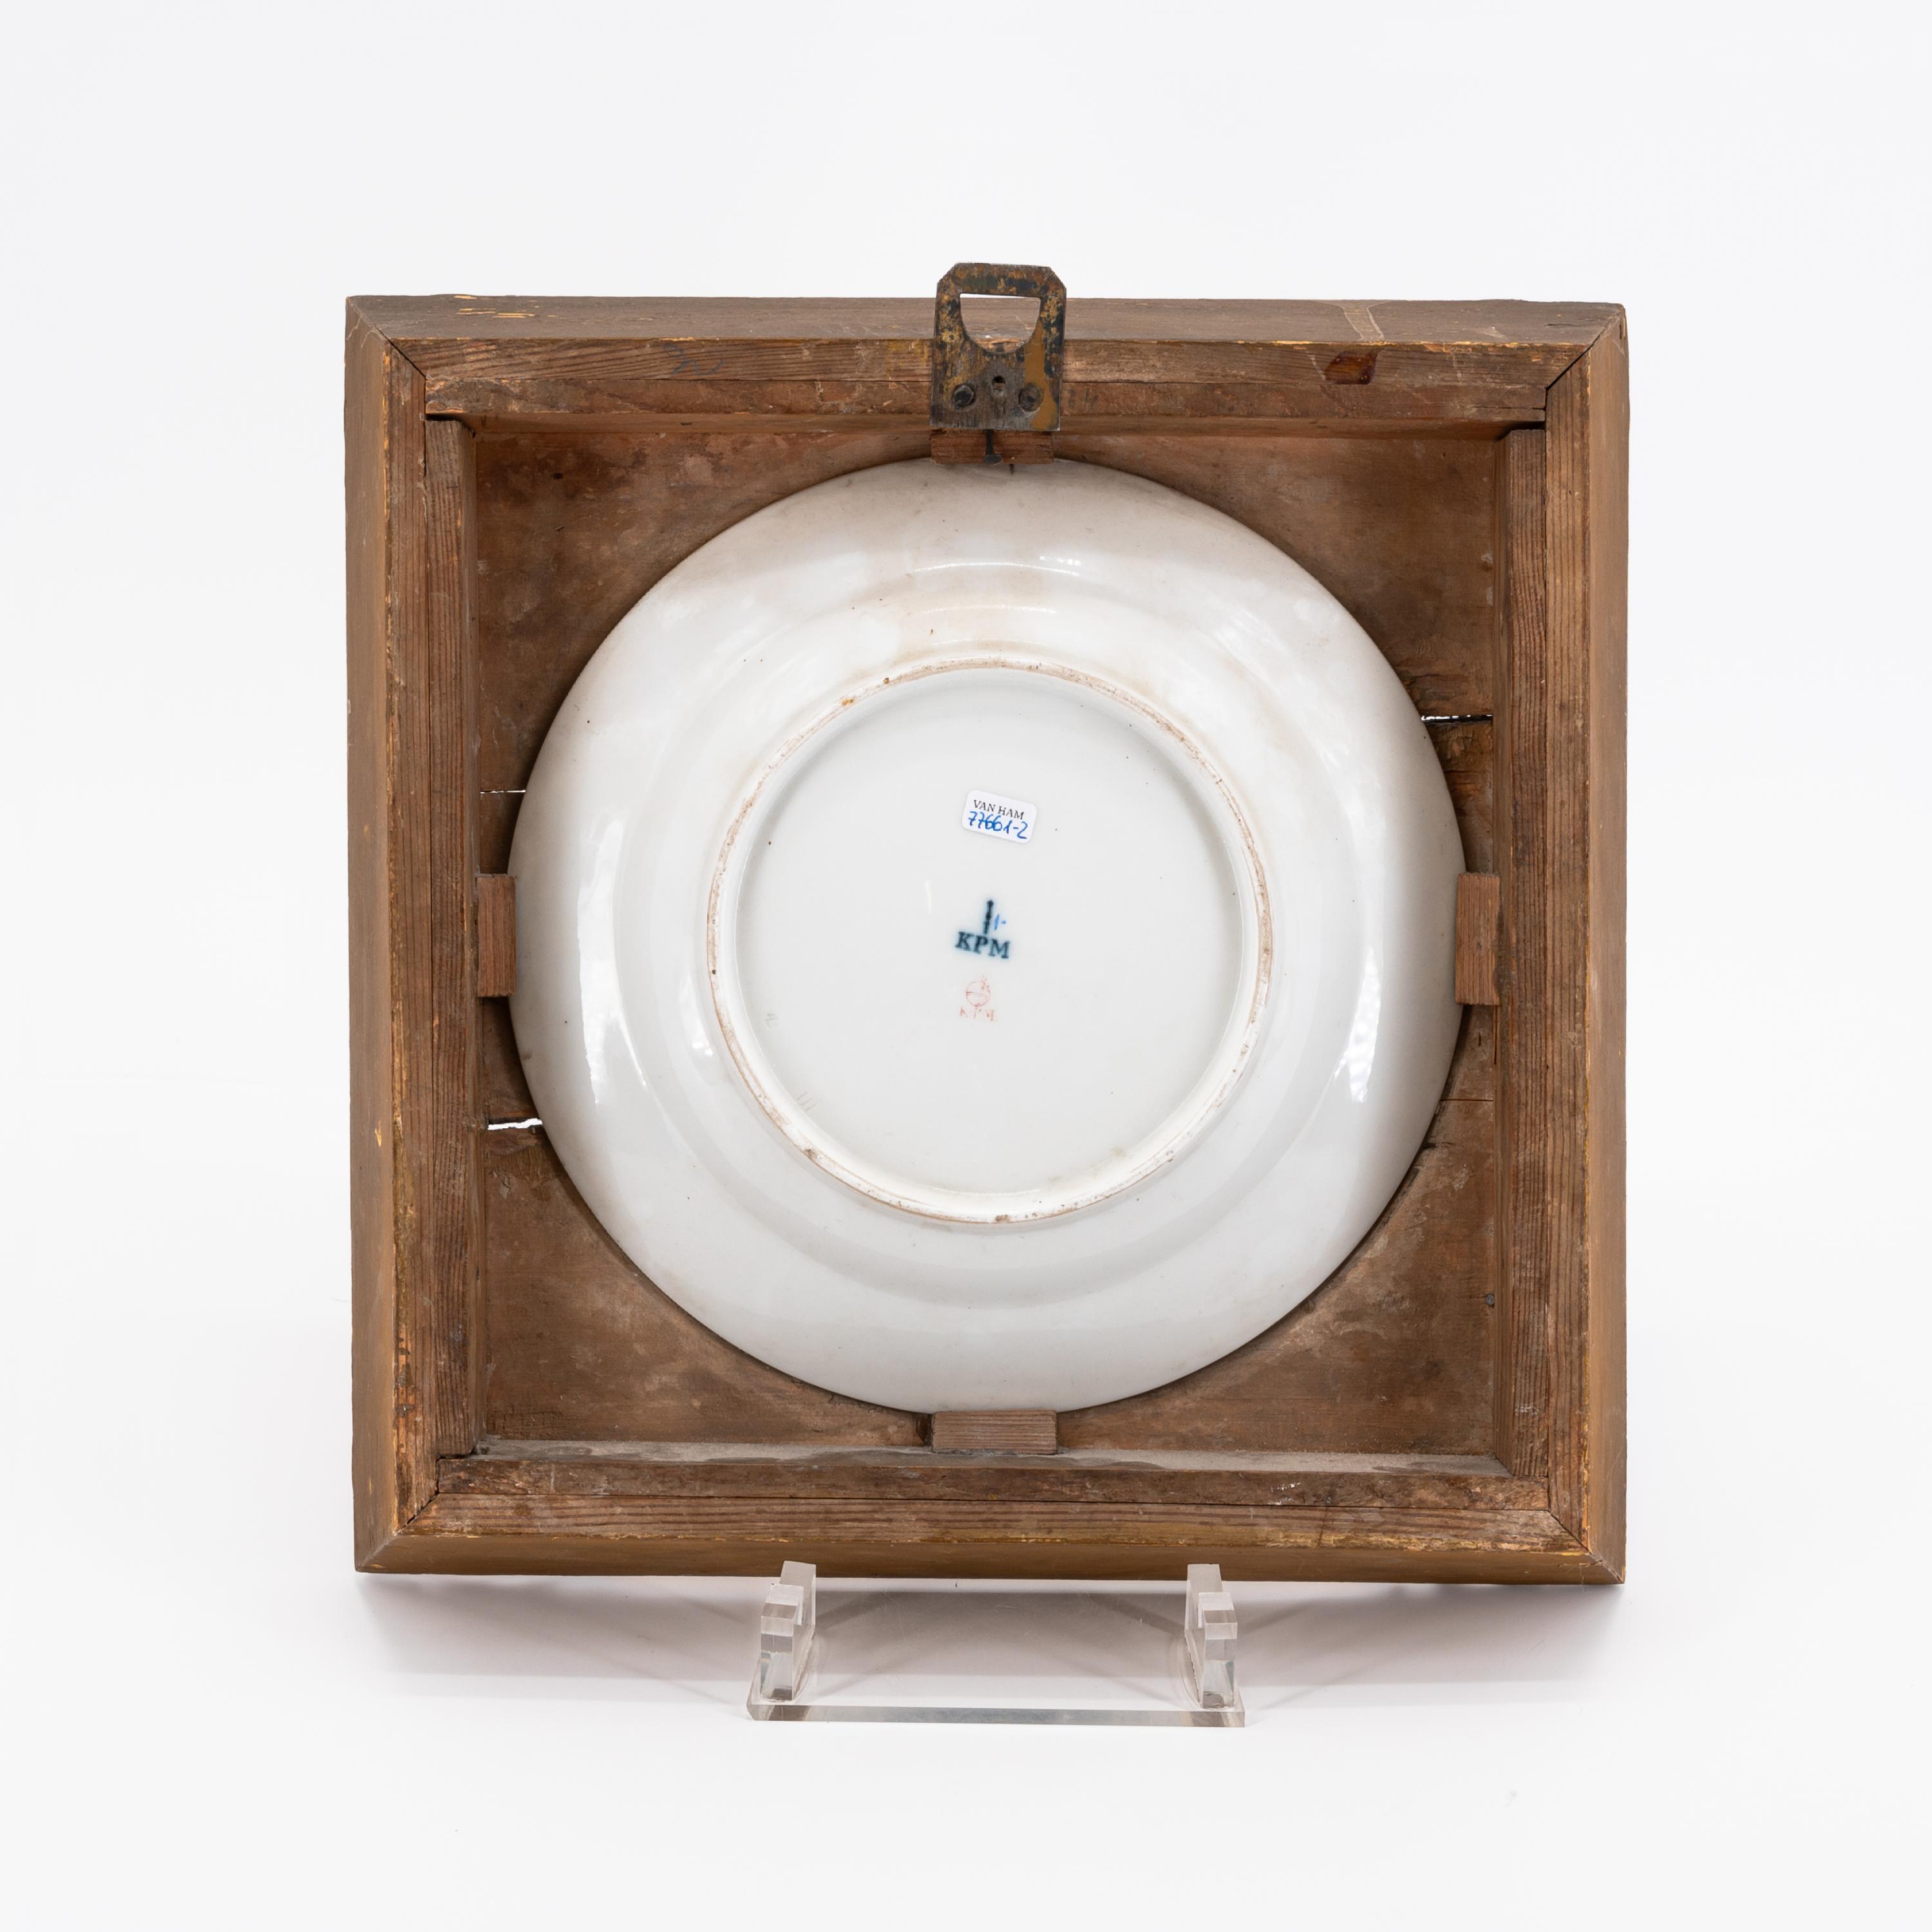 EXEPTIONAL SERIES OF TWELVE PORCELAIN PLATES WITH ROMANTIC VIEWS OF THE RHINE - Image 6 of 26